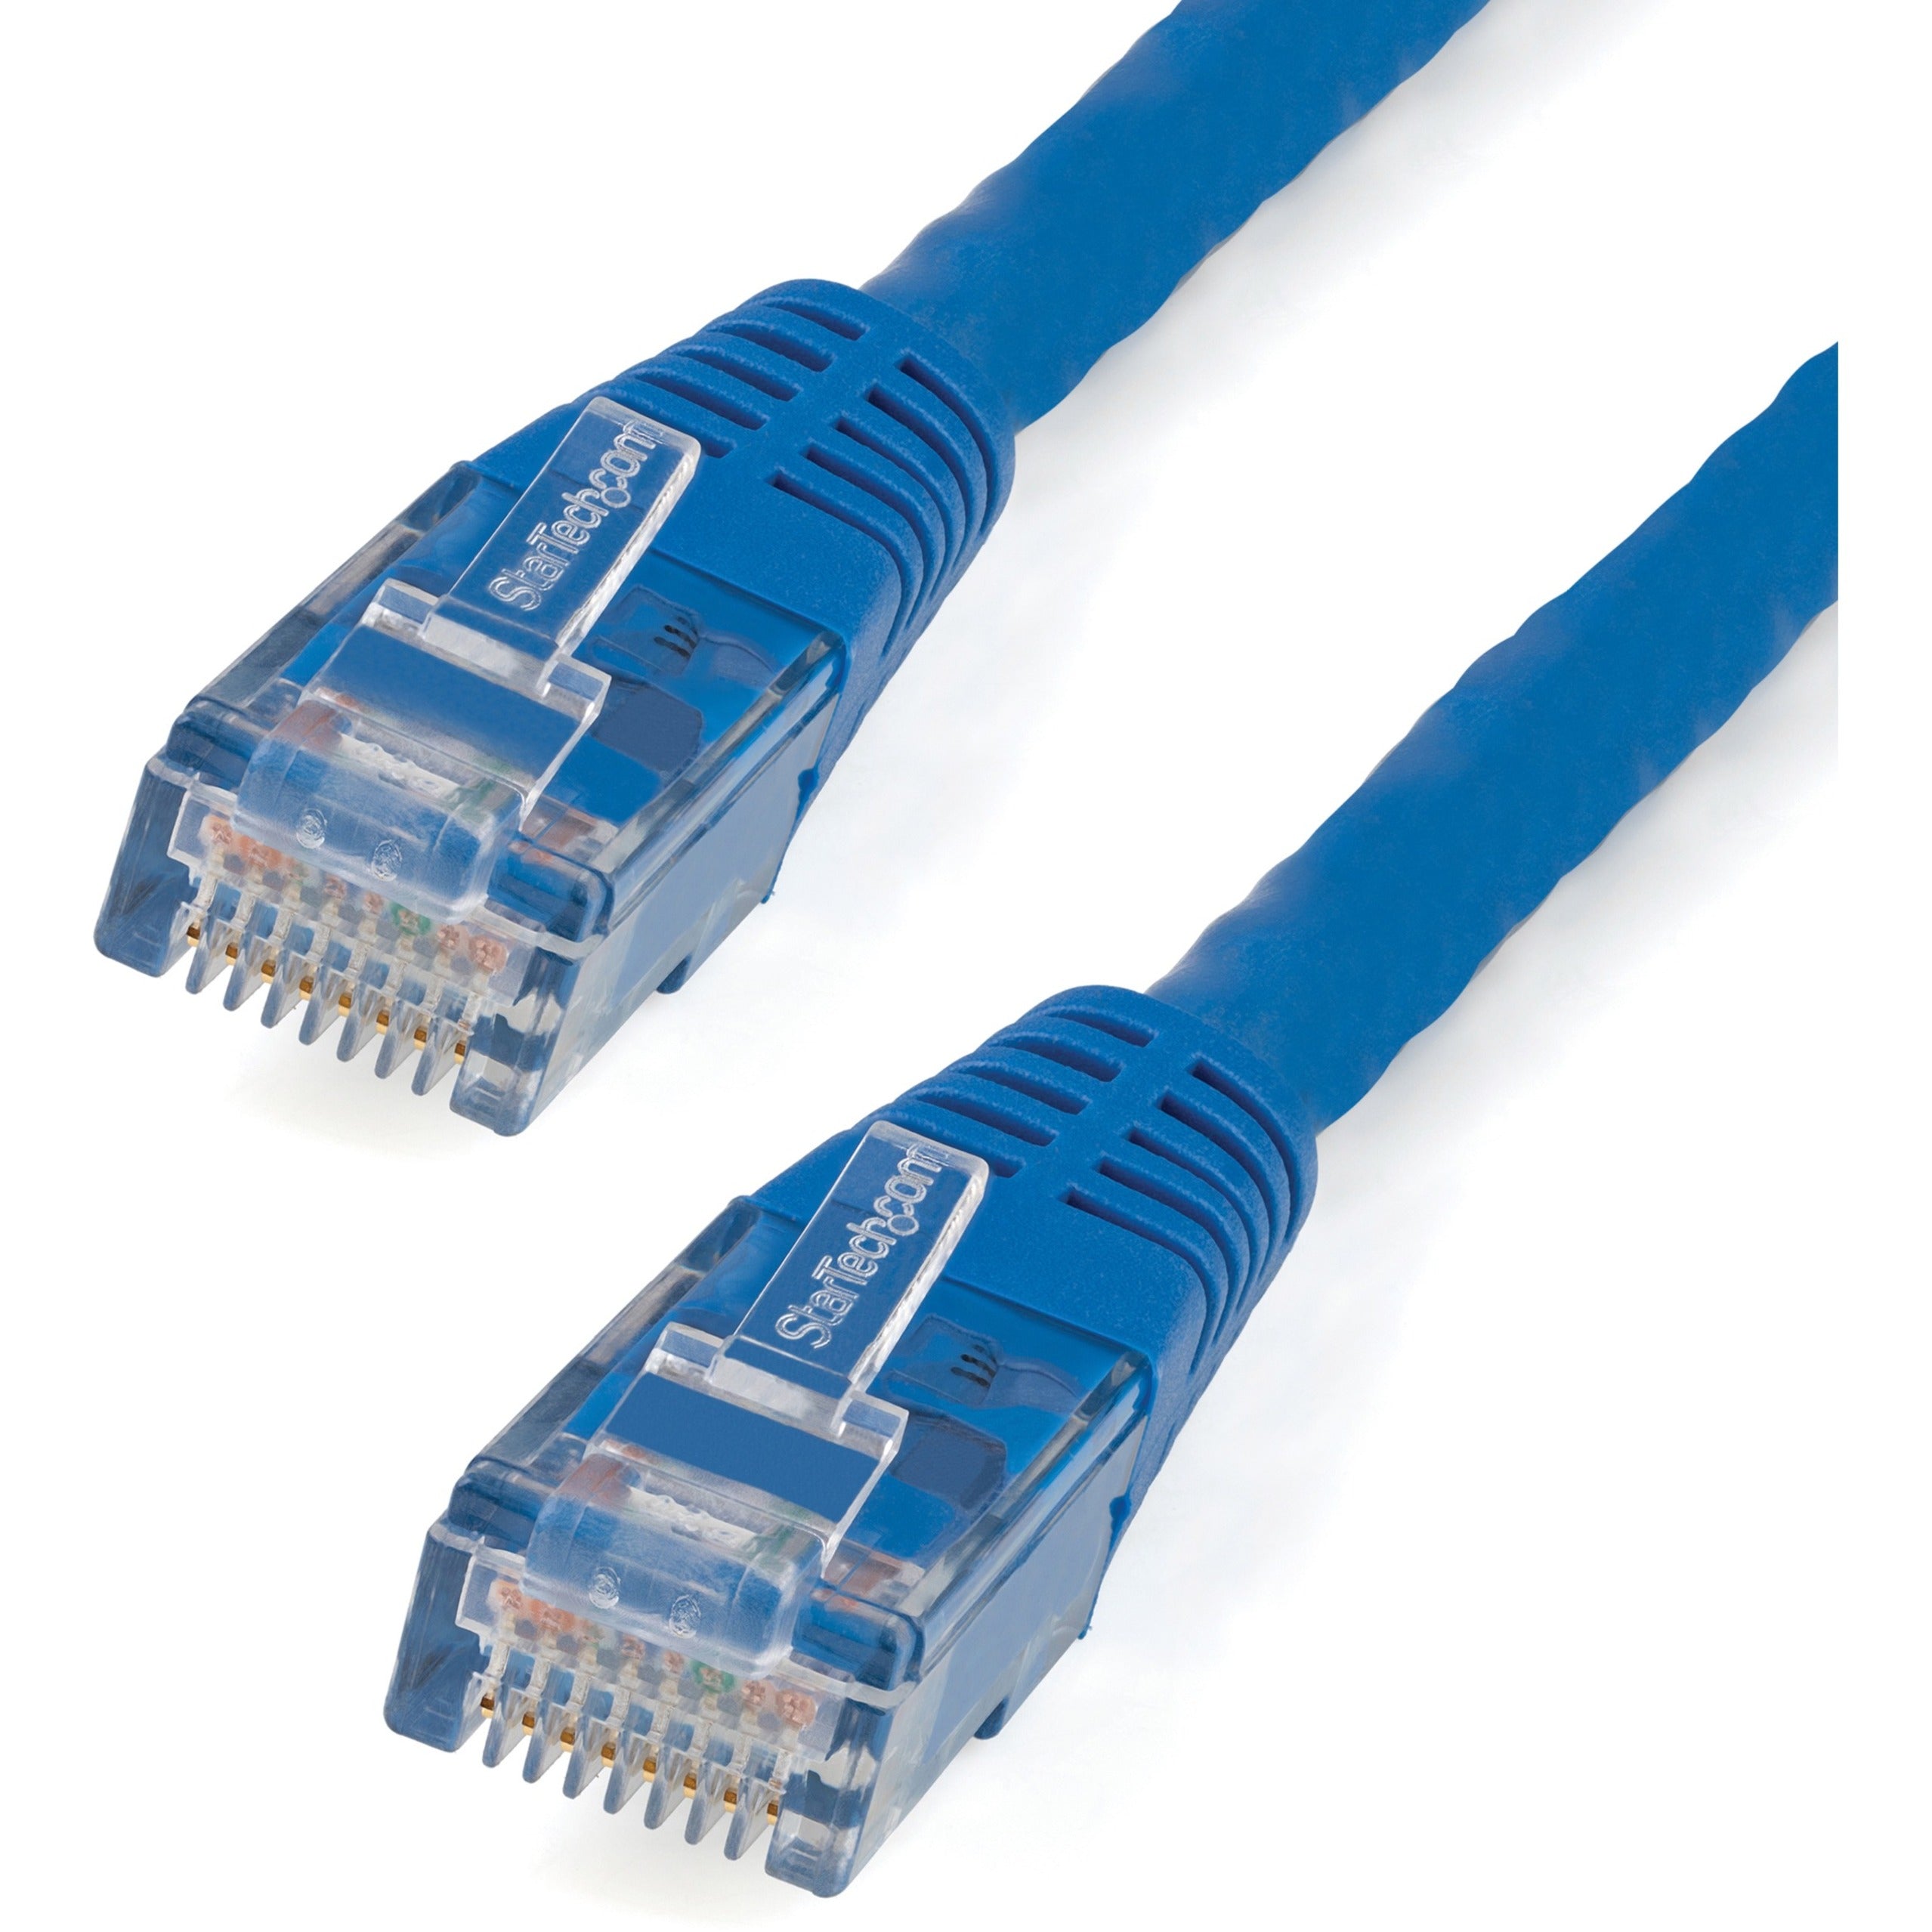 StarTech.com C6PATCH4BL 4ft Blue Molded Cat6 UTP Patch Cable ETL Verified 10 Gbit/s Data Transfer Rate Gold Plated Connectors  スターテック・ドットコム C6PATCH4BL 4フィート ブルー成形済み Cat6 UTP パッチケーブル ETL検証済み 10ギガビット/秒のデータ転送速度 コネクター金メッキ